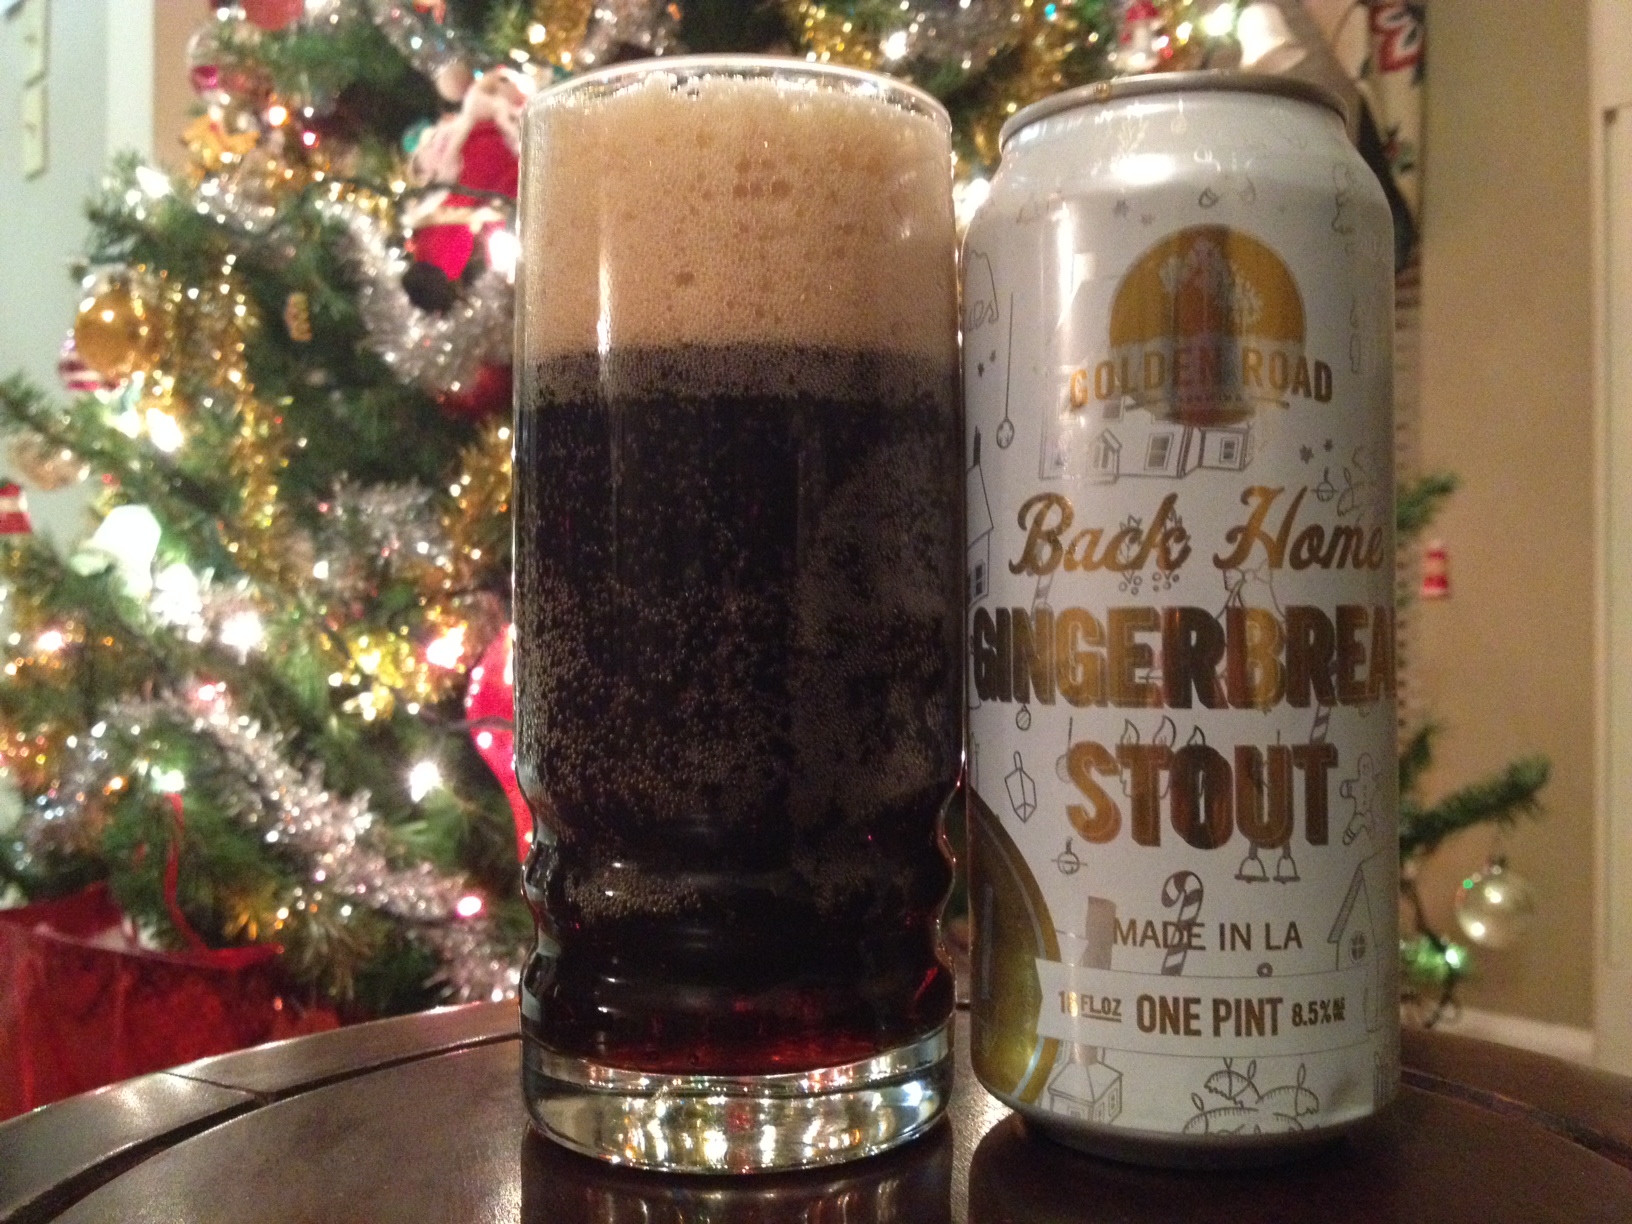 12 Beers of Christmas Day 12 | Golden Road Brewing Back Home Gingerbread Stout